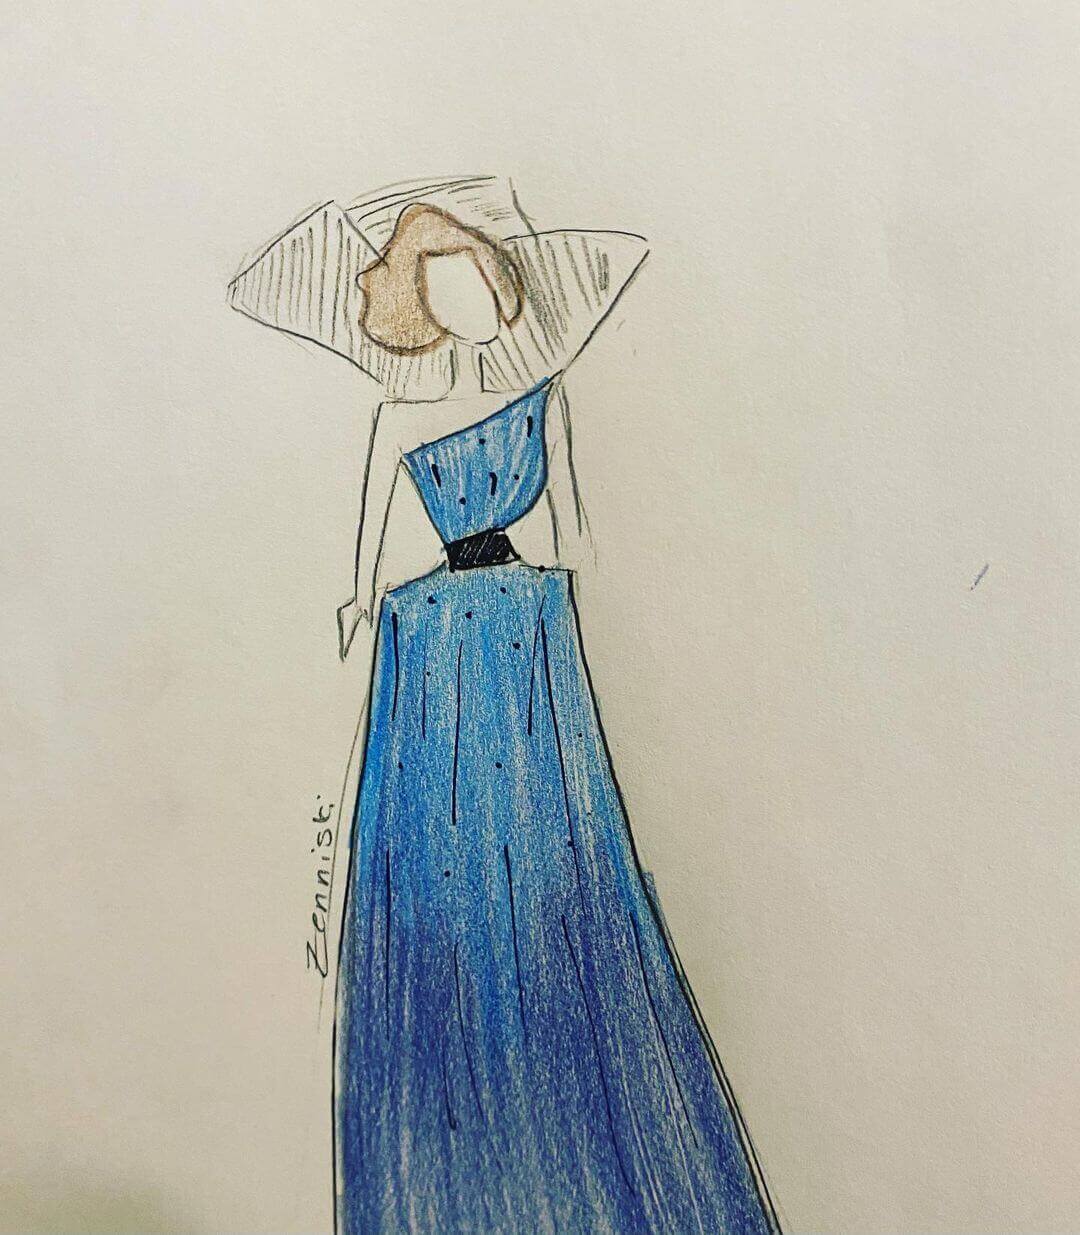 2. Fashion illustration drawing of a blue dress with black belt and neck cape